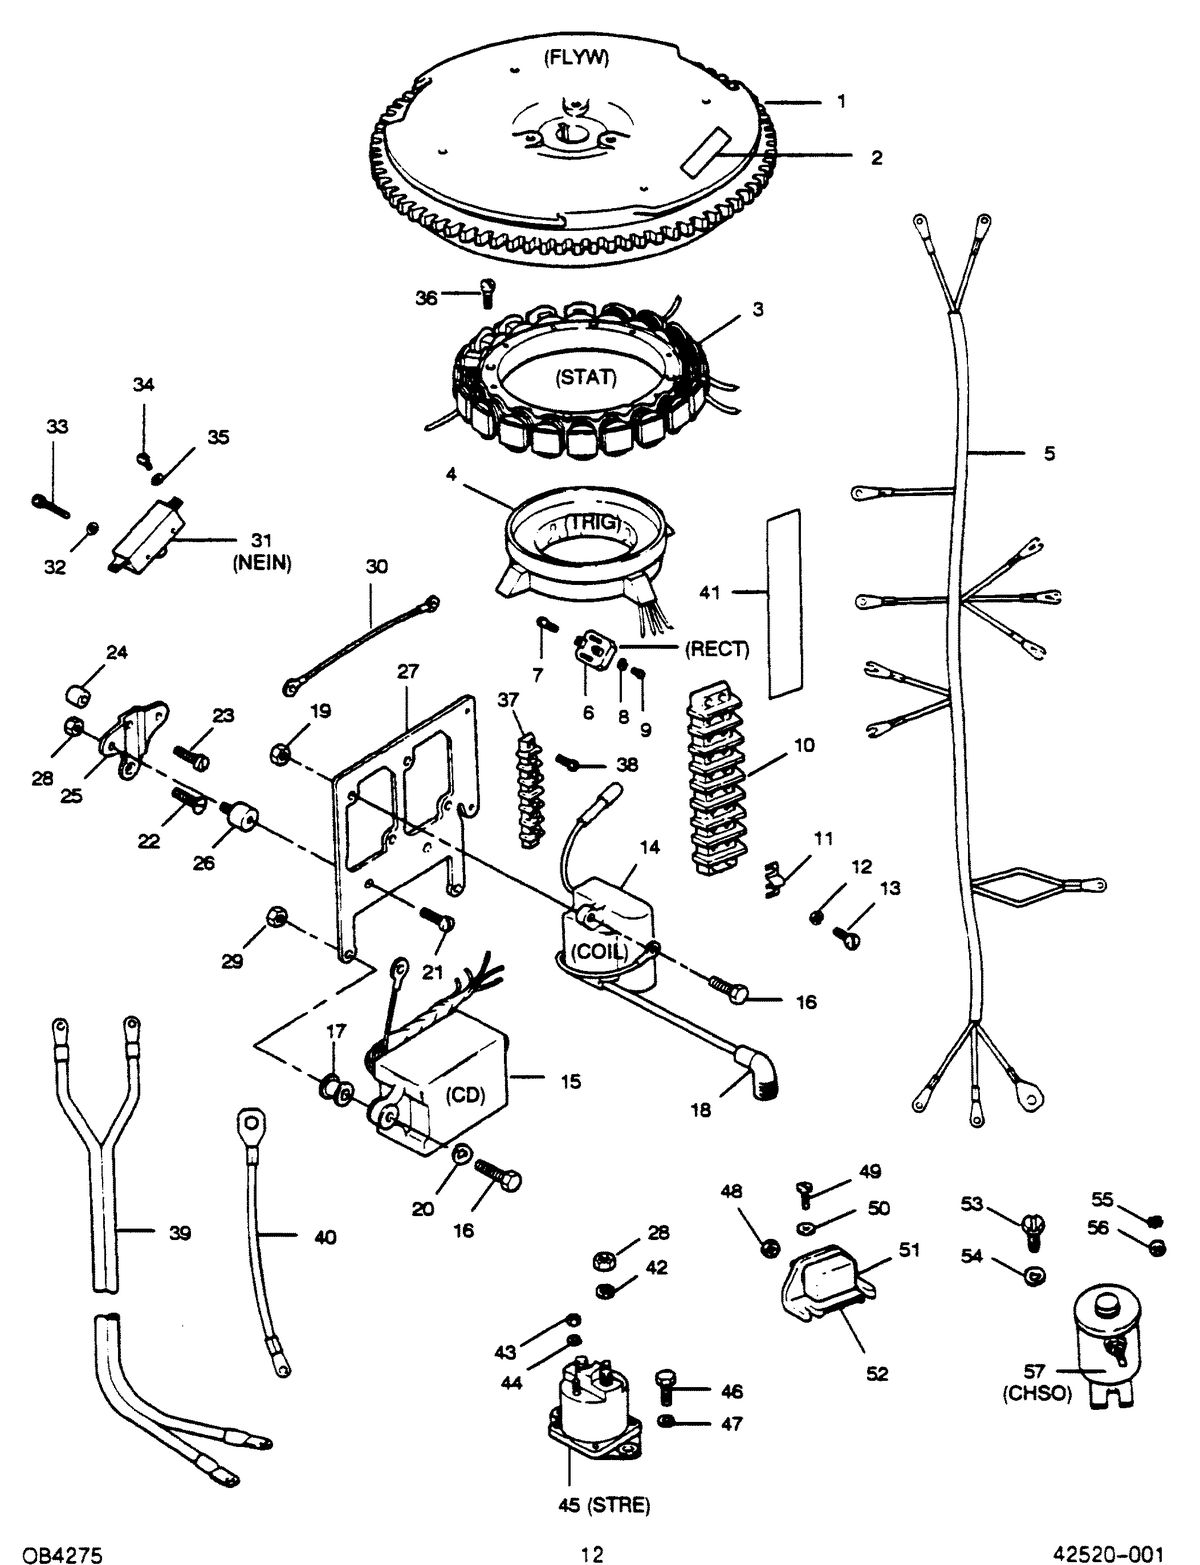 FORCE FORCE 1989 50 H.P. "B" MODELS ELECTRICAL COMPONENTS